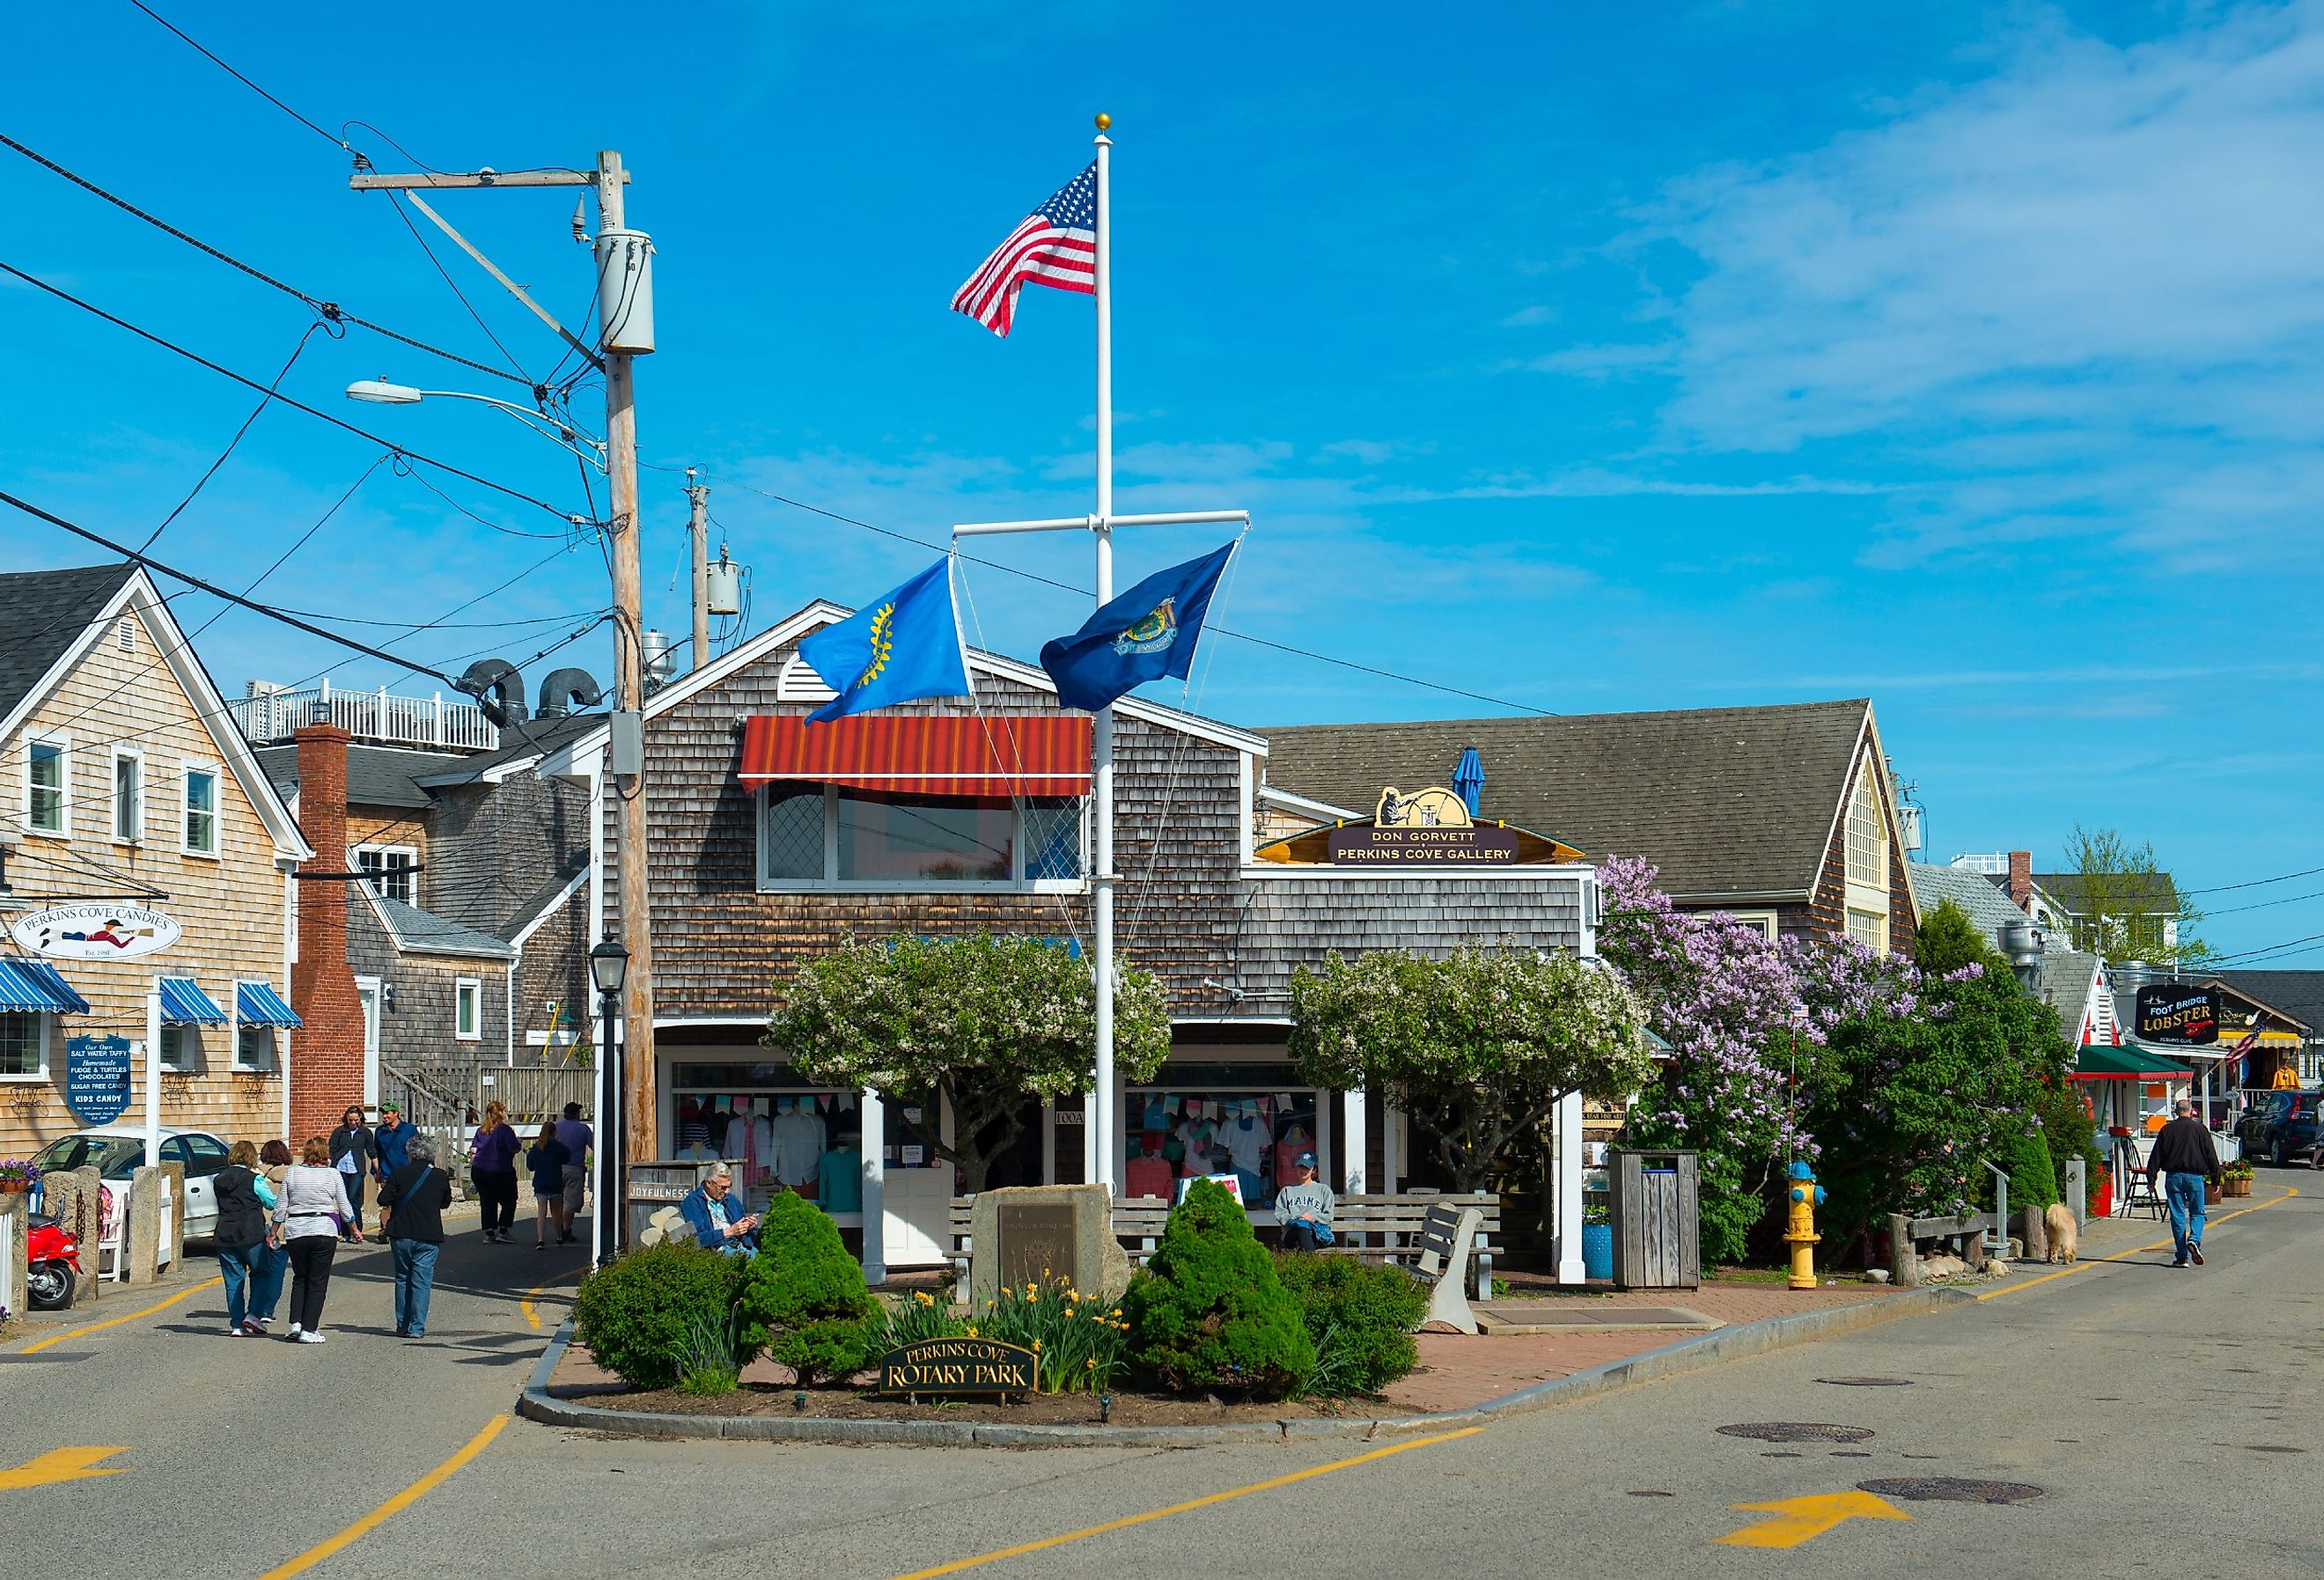 Historic buildings and shops in Perkins Cove in Ogunquit, Maine. Image credit Wangkun Jia via Shutterstock